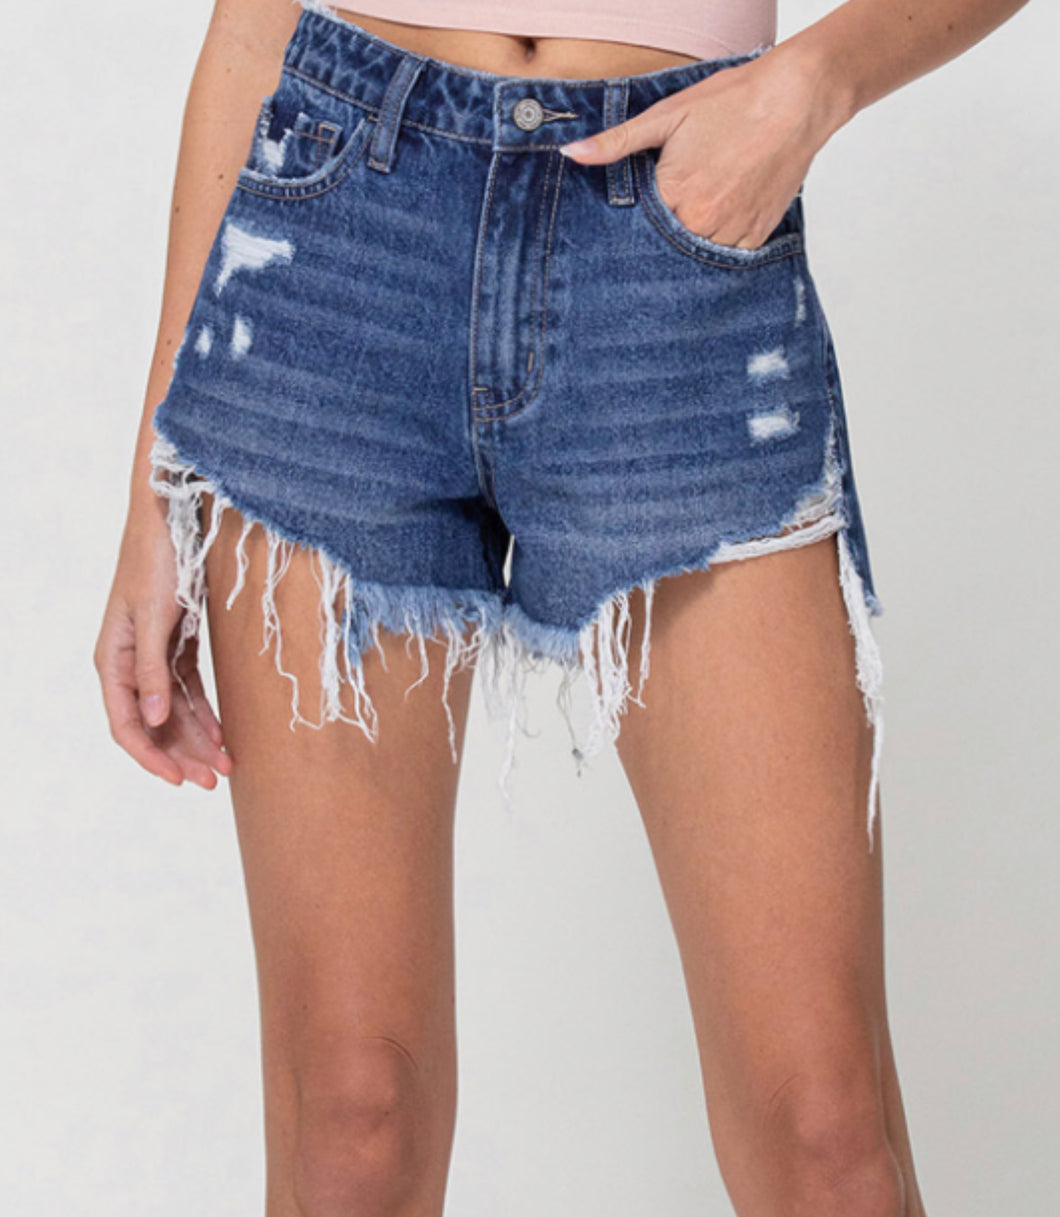 Worn in Well Destroyed Shorts